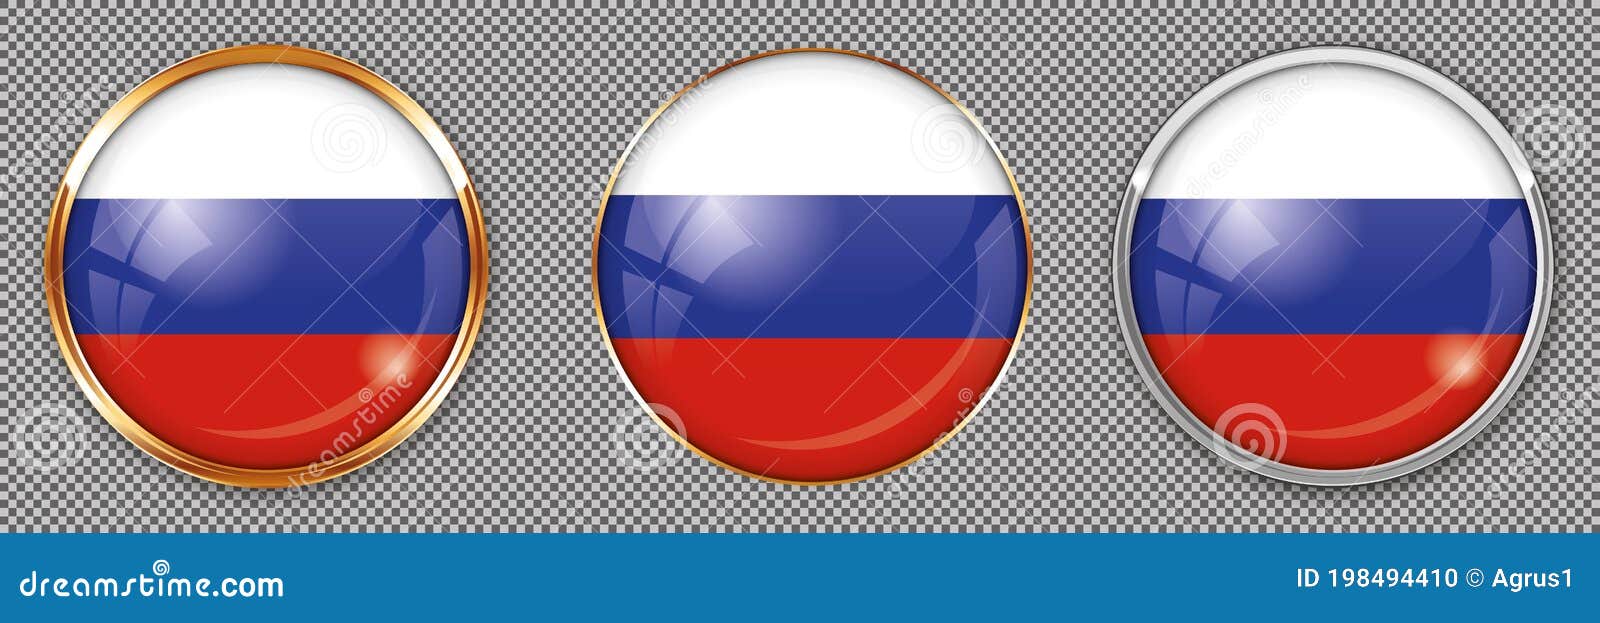 Round Buttons With Flag Of Russia On Transparent Background Stock Vector Illustration Of Round Design 198494410